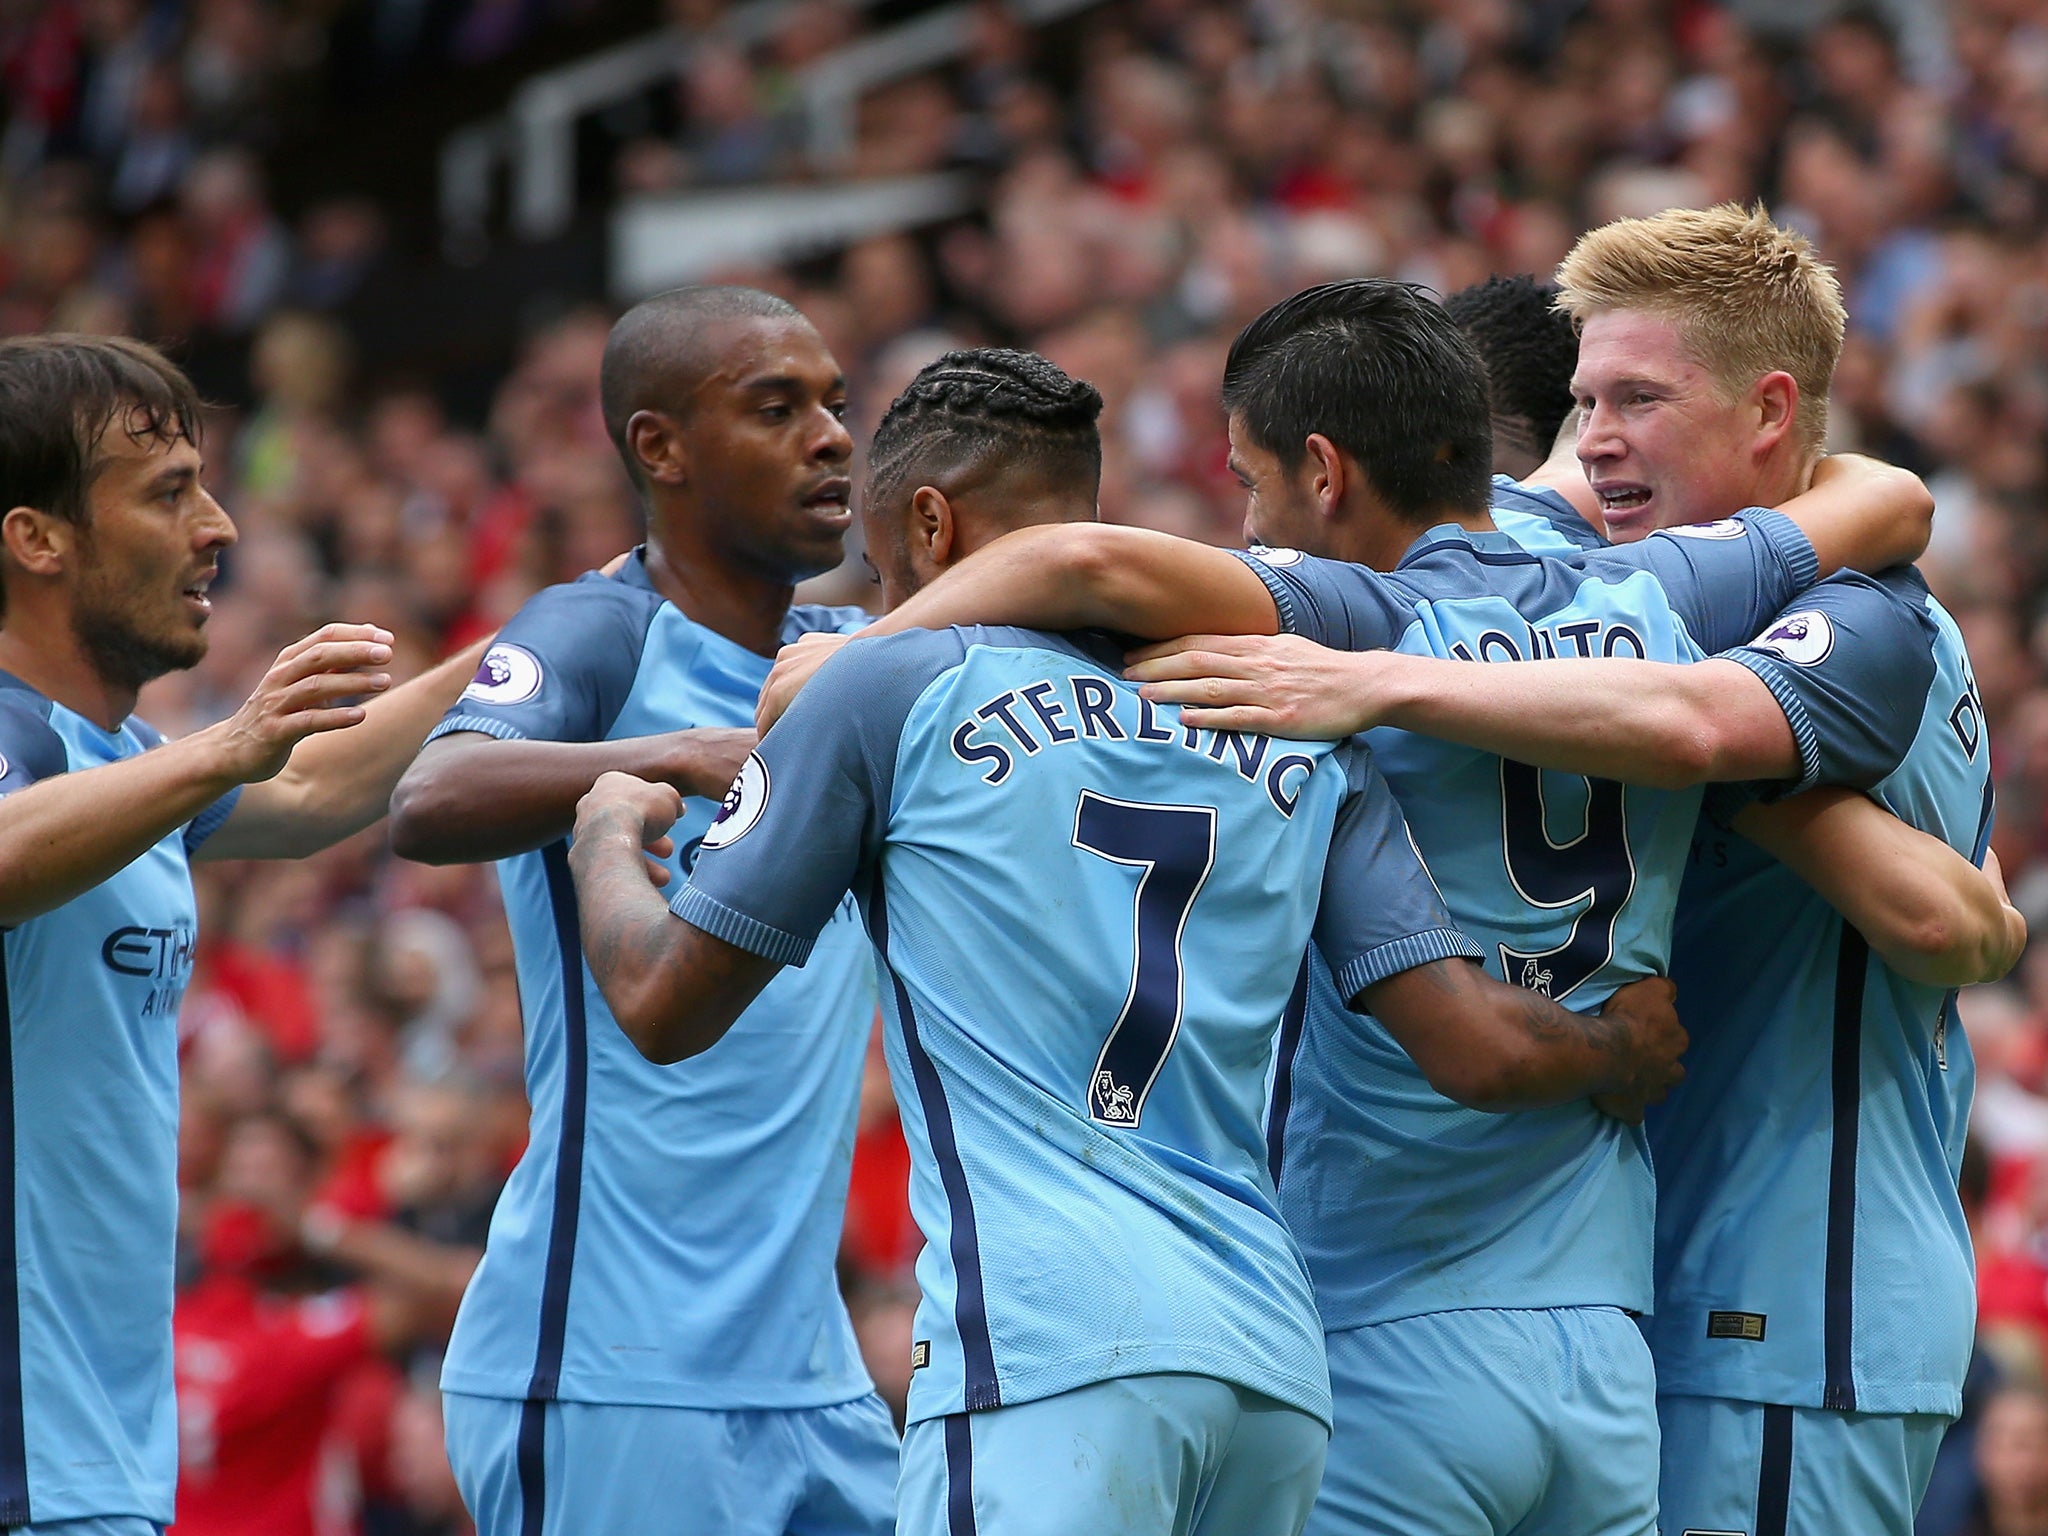 City's players celebrate taking the lead at Old Trafford